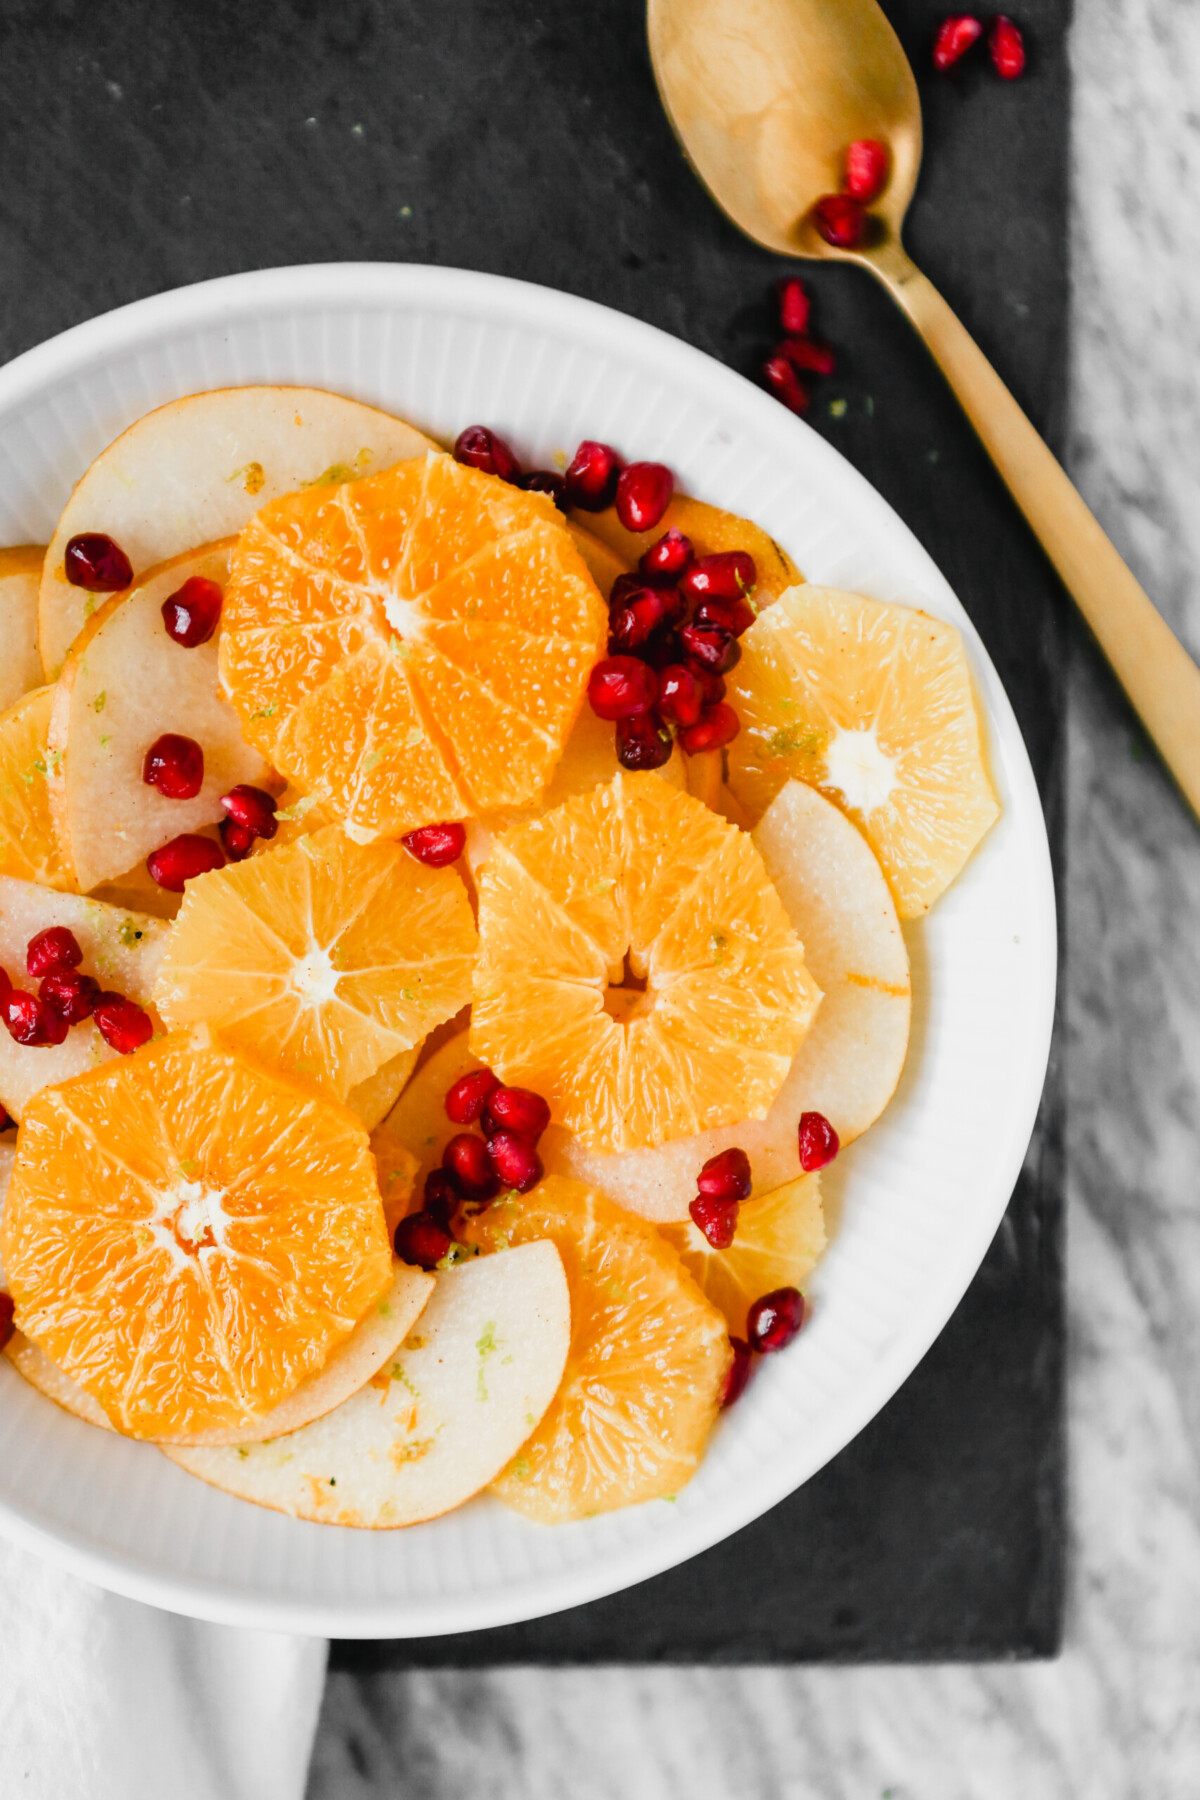 Photograph of winter citrus fruit salad with pomegranate seeds set in a white bowl on a marble table.